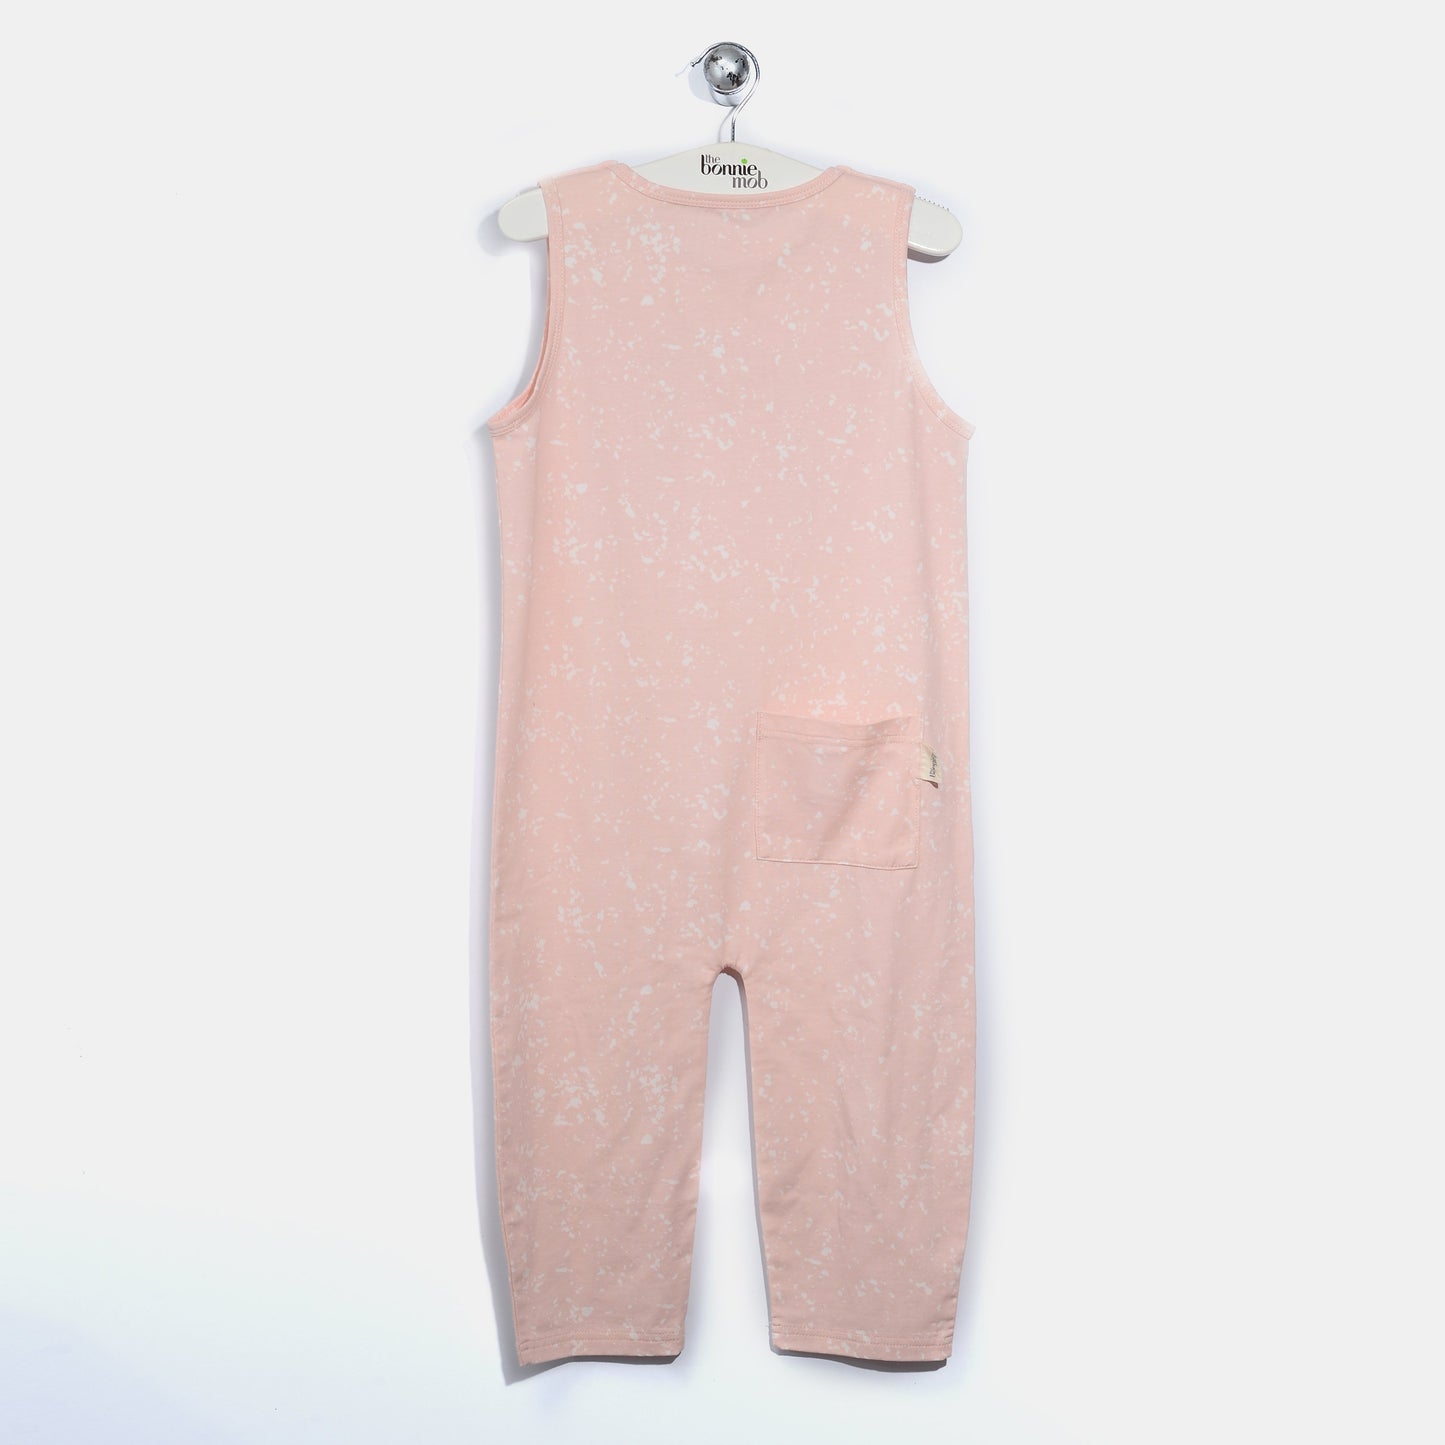 PLAYSUIT - BABY - BLUSH - L-BUSY